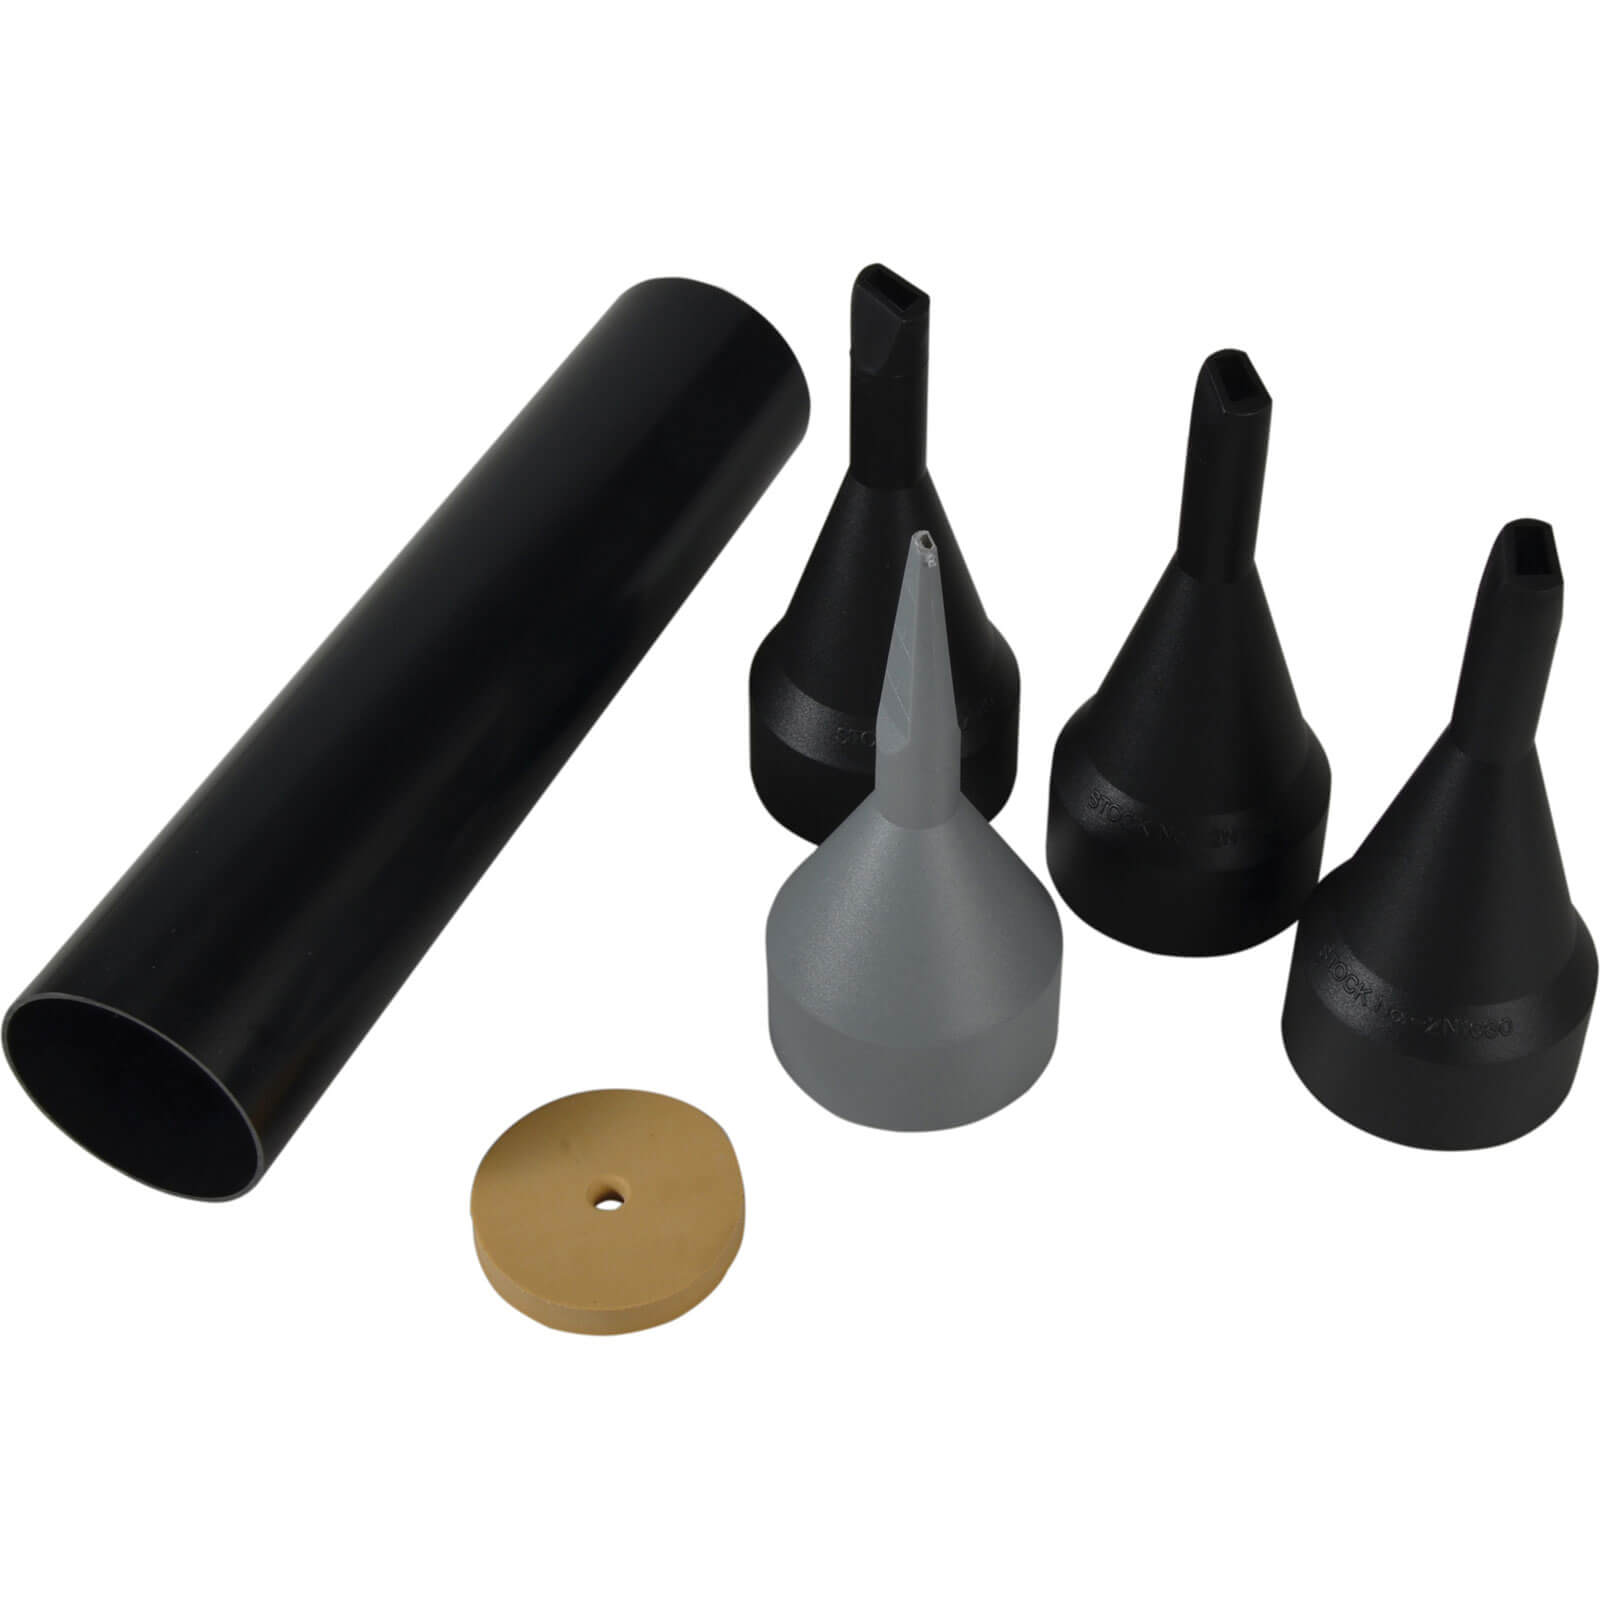 Photo of Cox 7xp016 Spares Kit For Pointing Gun